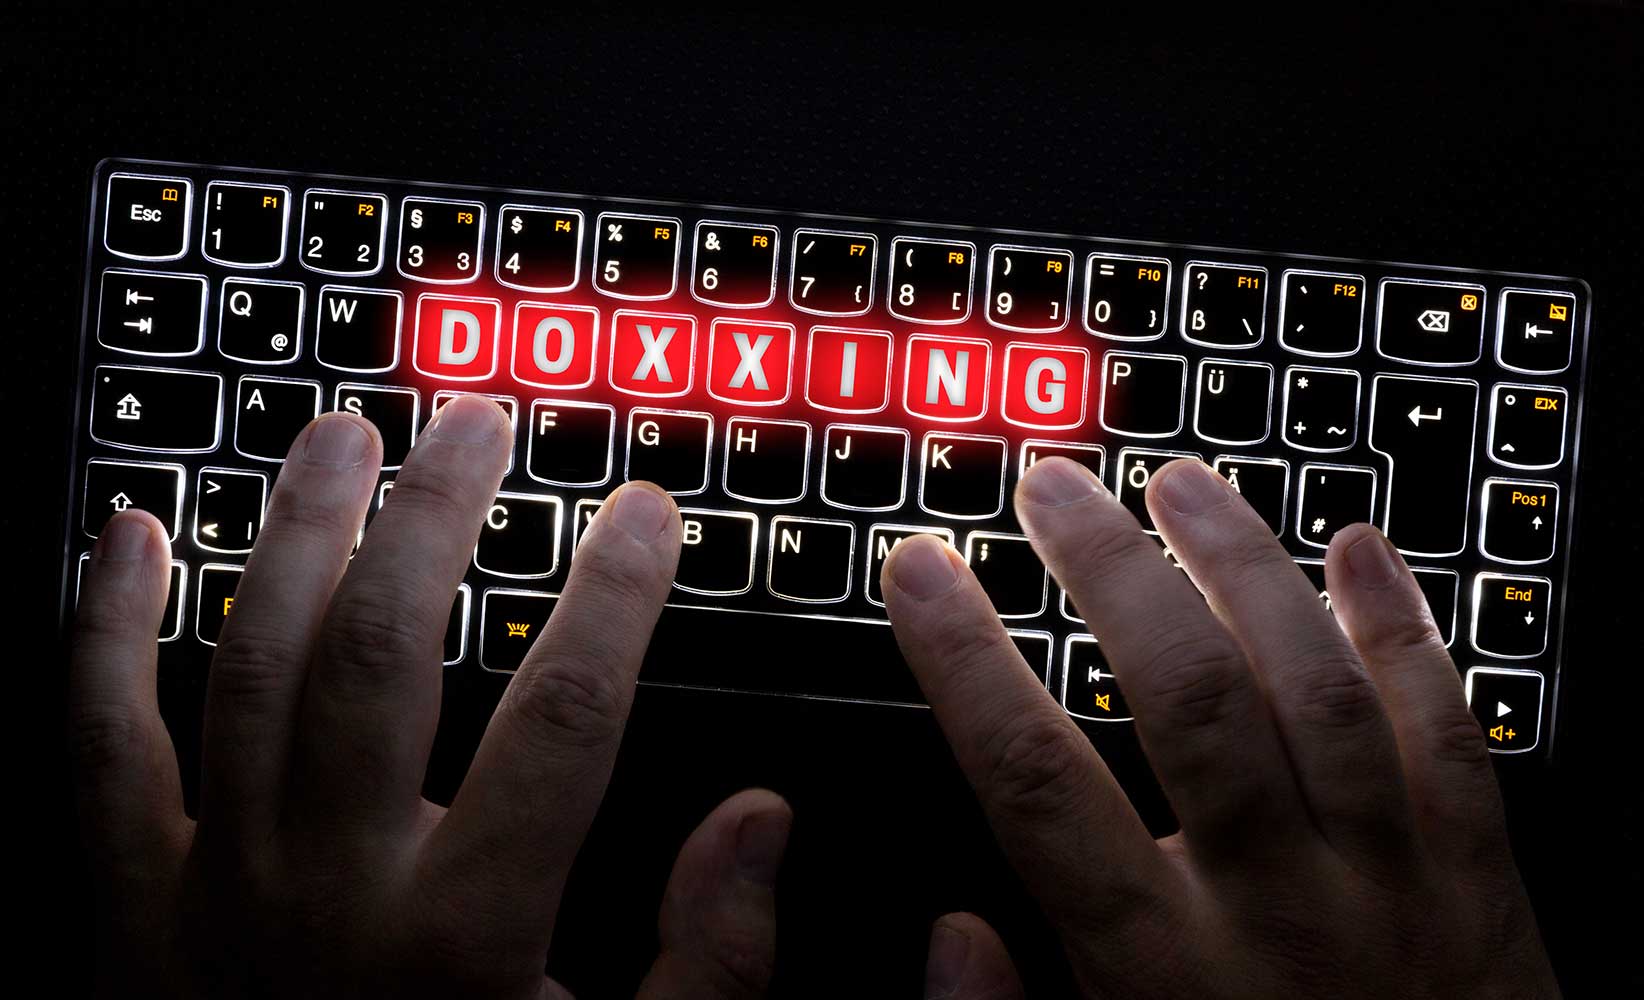 What Is Doxxing?